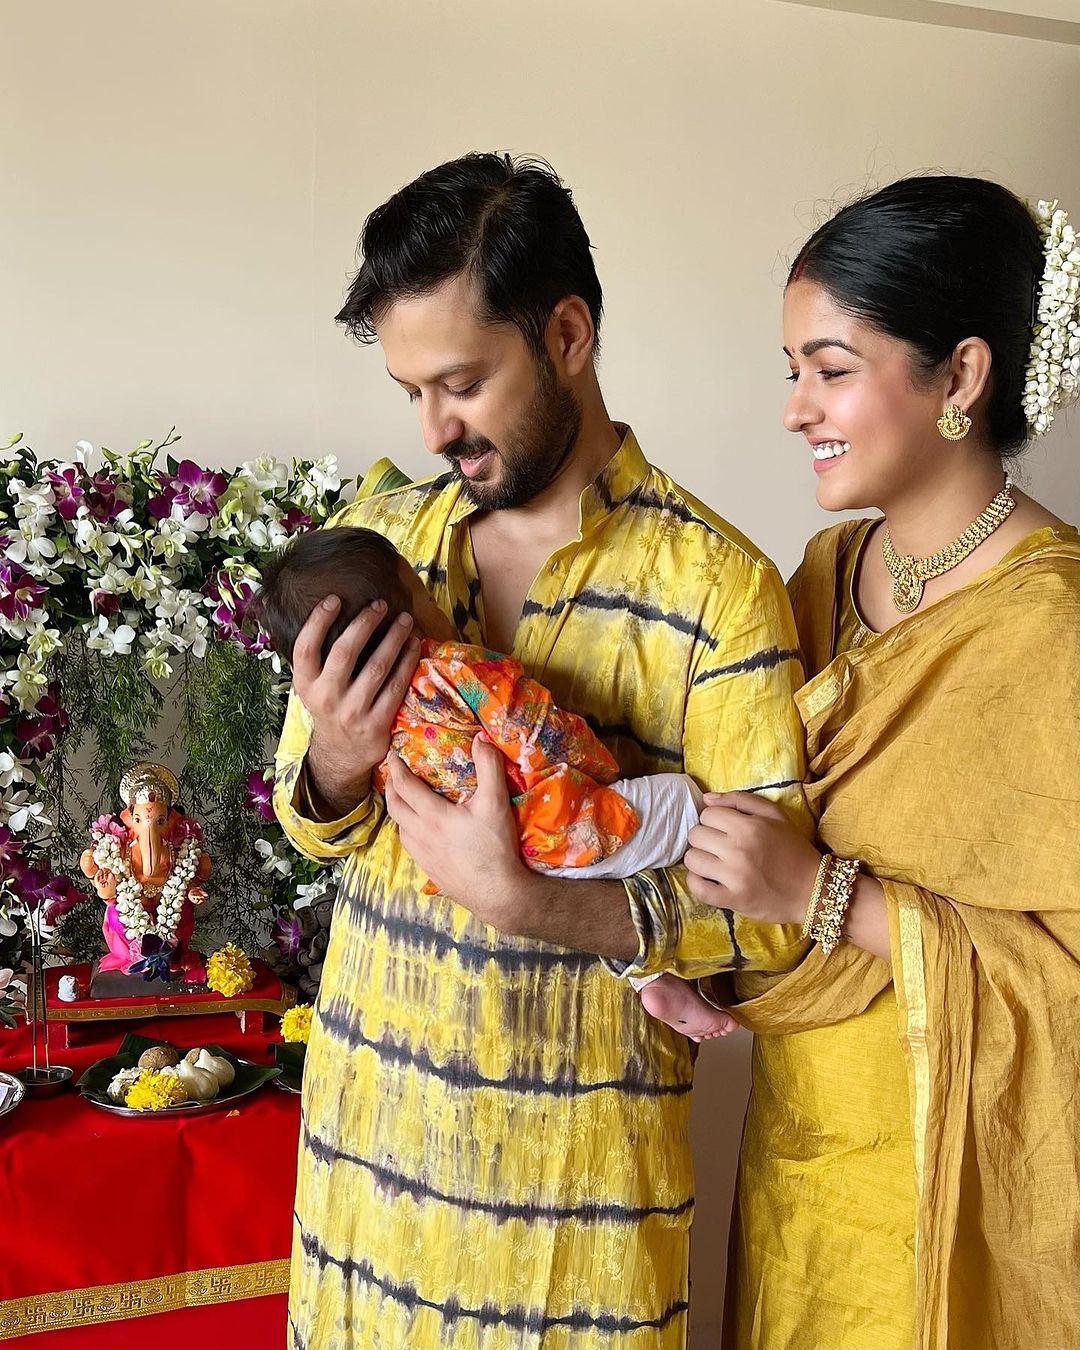 Ishita Dutta and Vatsal Sheth on 20th July 2023, the two were blessed with their first child a baby boy Vaayu